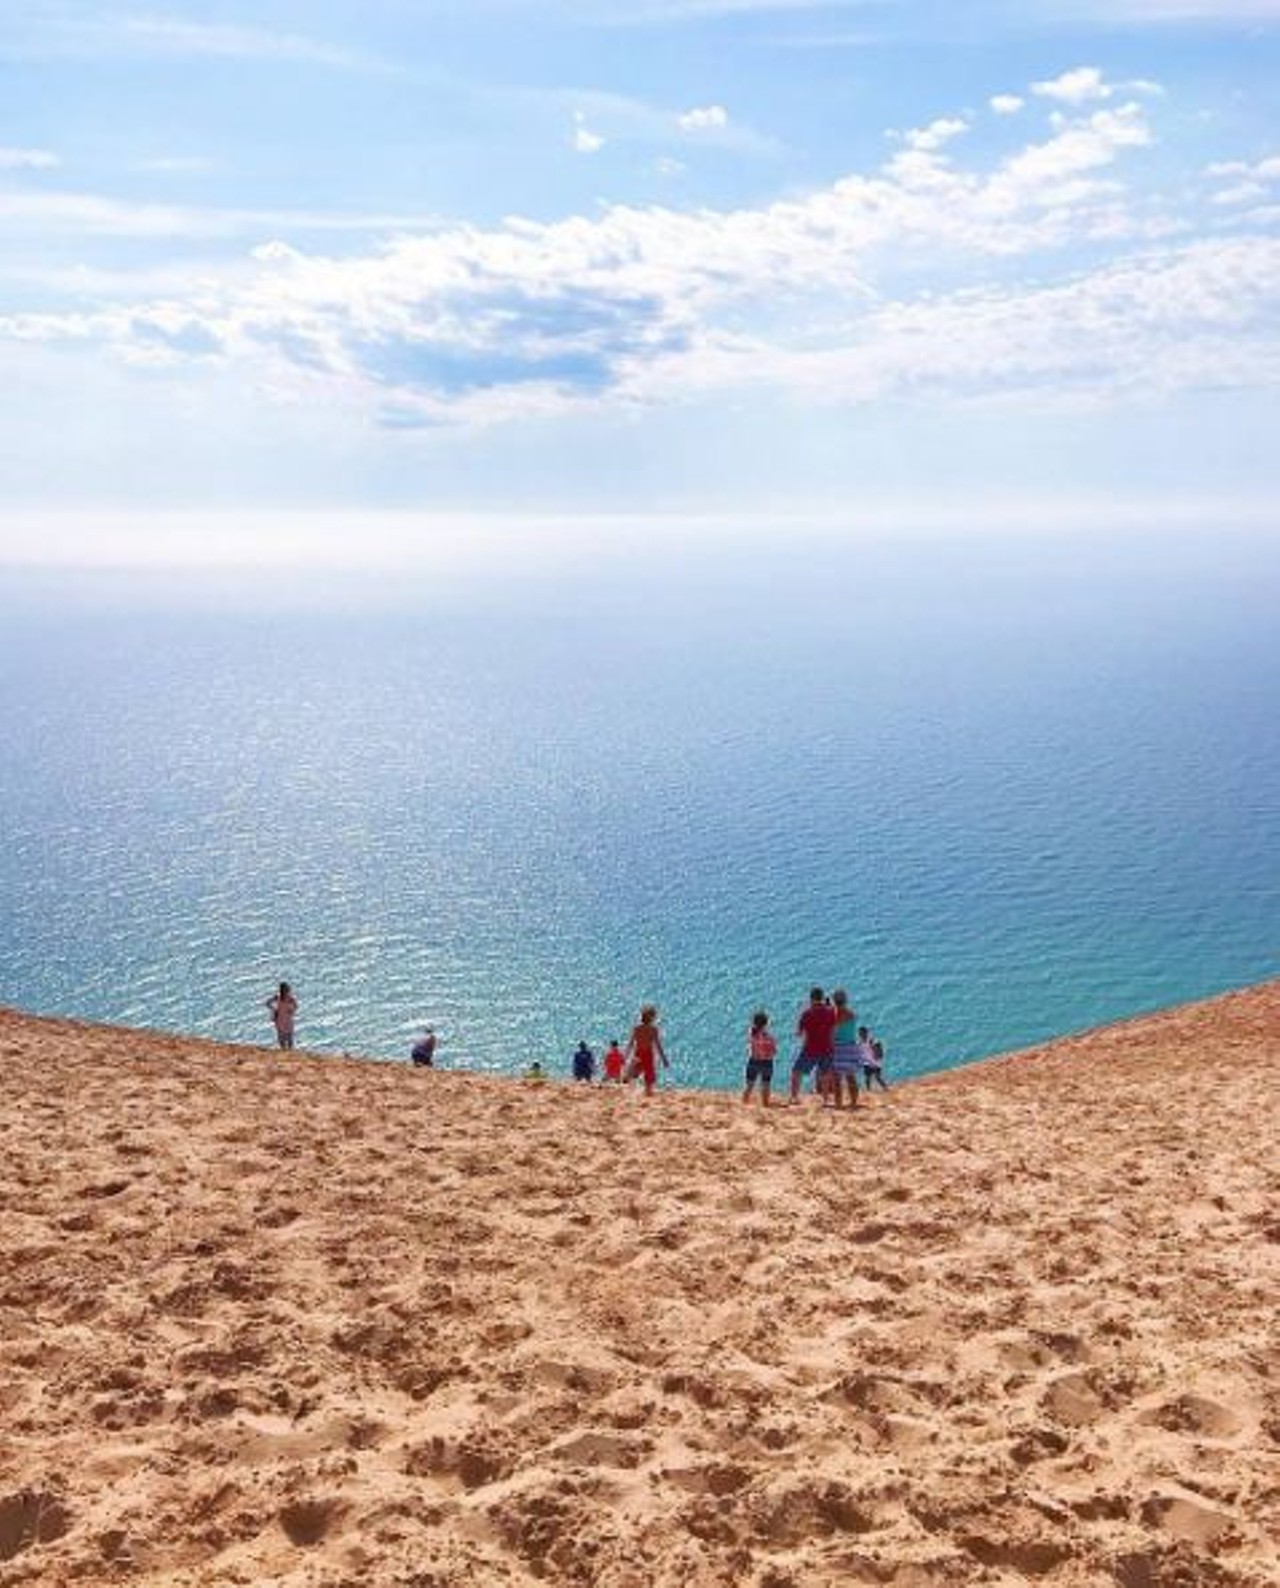 Empire
4 hours and 15 minutes from Detroit
If you&#146;re not going to the sand dunes when you&#146;re in town of Empire then what are you even doing with your life? Located at the top of Lake Michigan near Traverse City, the sand dunes in Empire are simply breathtaking and look over gorgeous Lake Michigan. Seriously, you need to go there. Photo via IG user @puremittenpride.